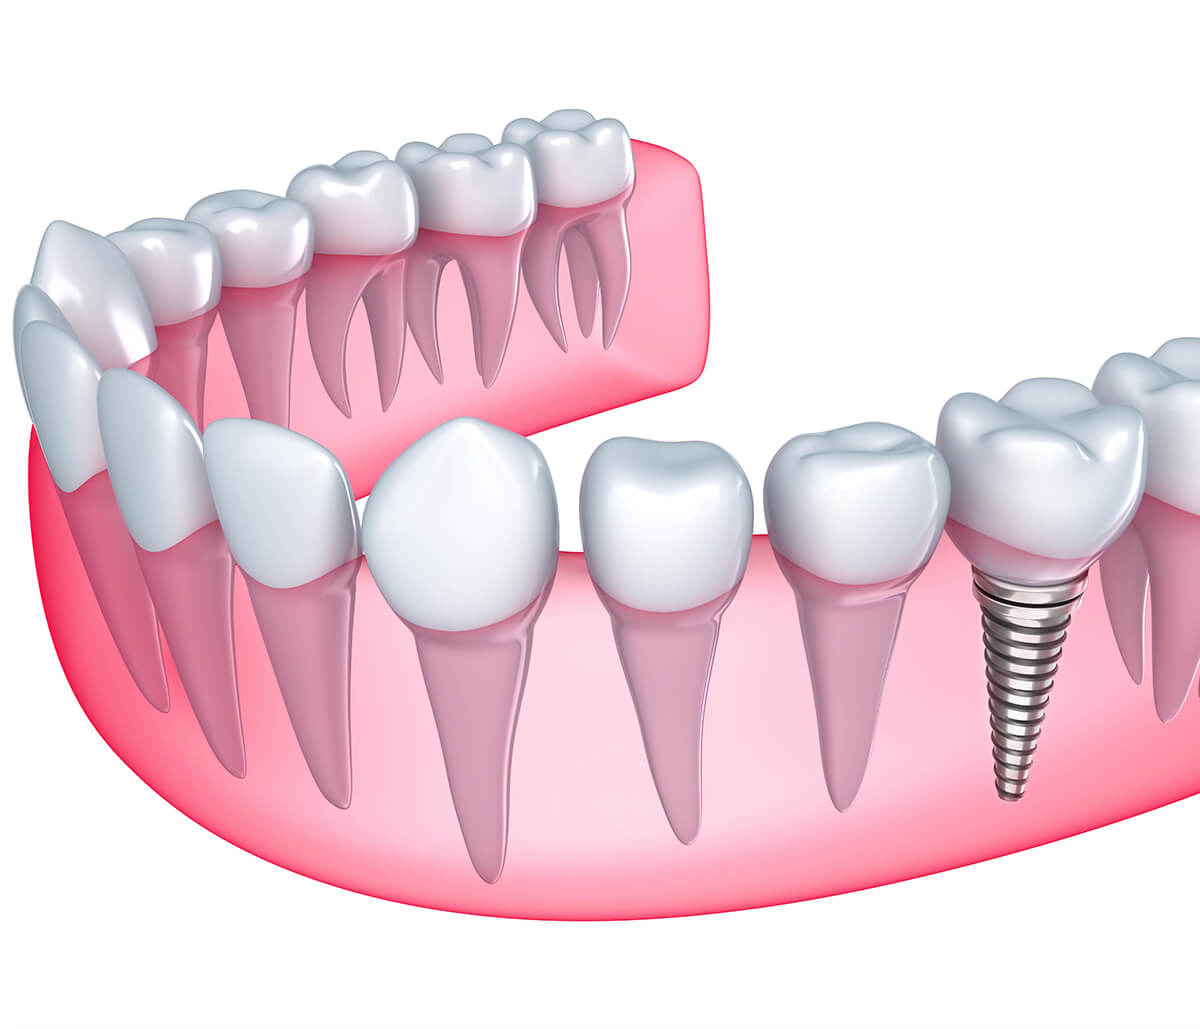 Steps to Replace a Tooth, a Mouthful of Teeth with the Dental Implant Procedure in Fort Worth, TX Area